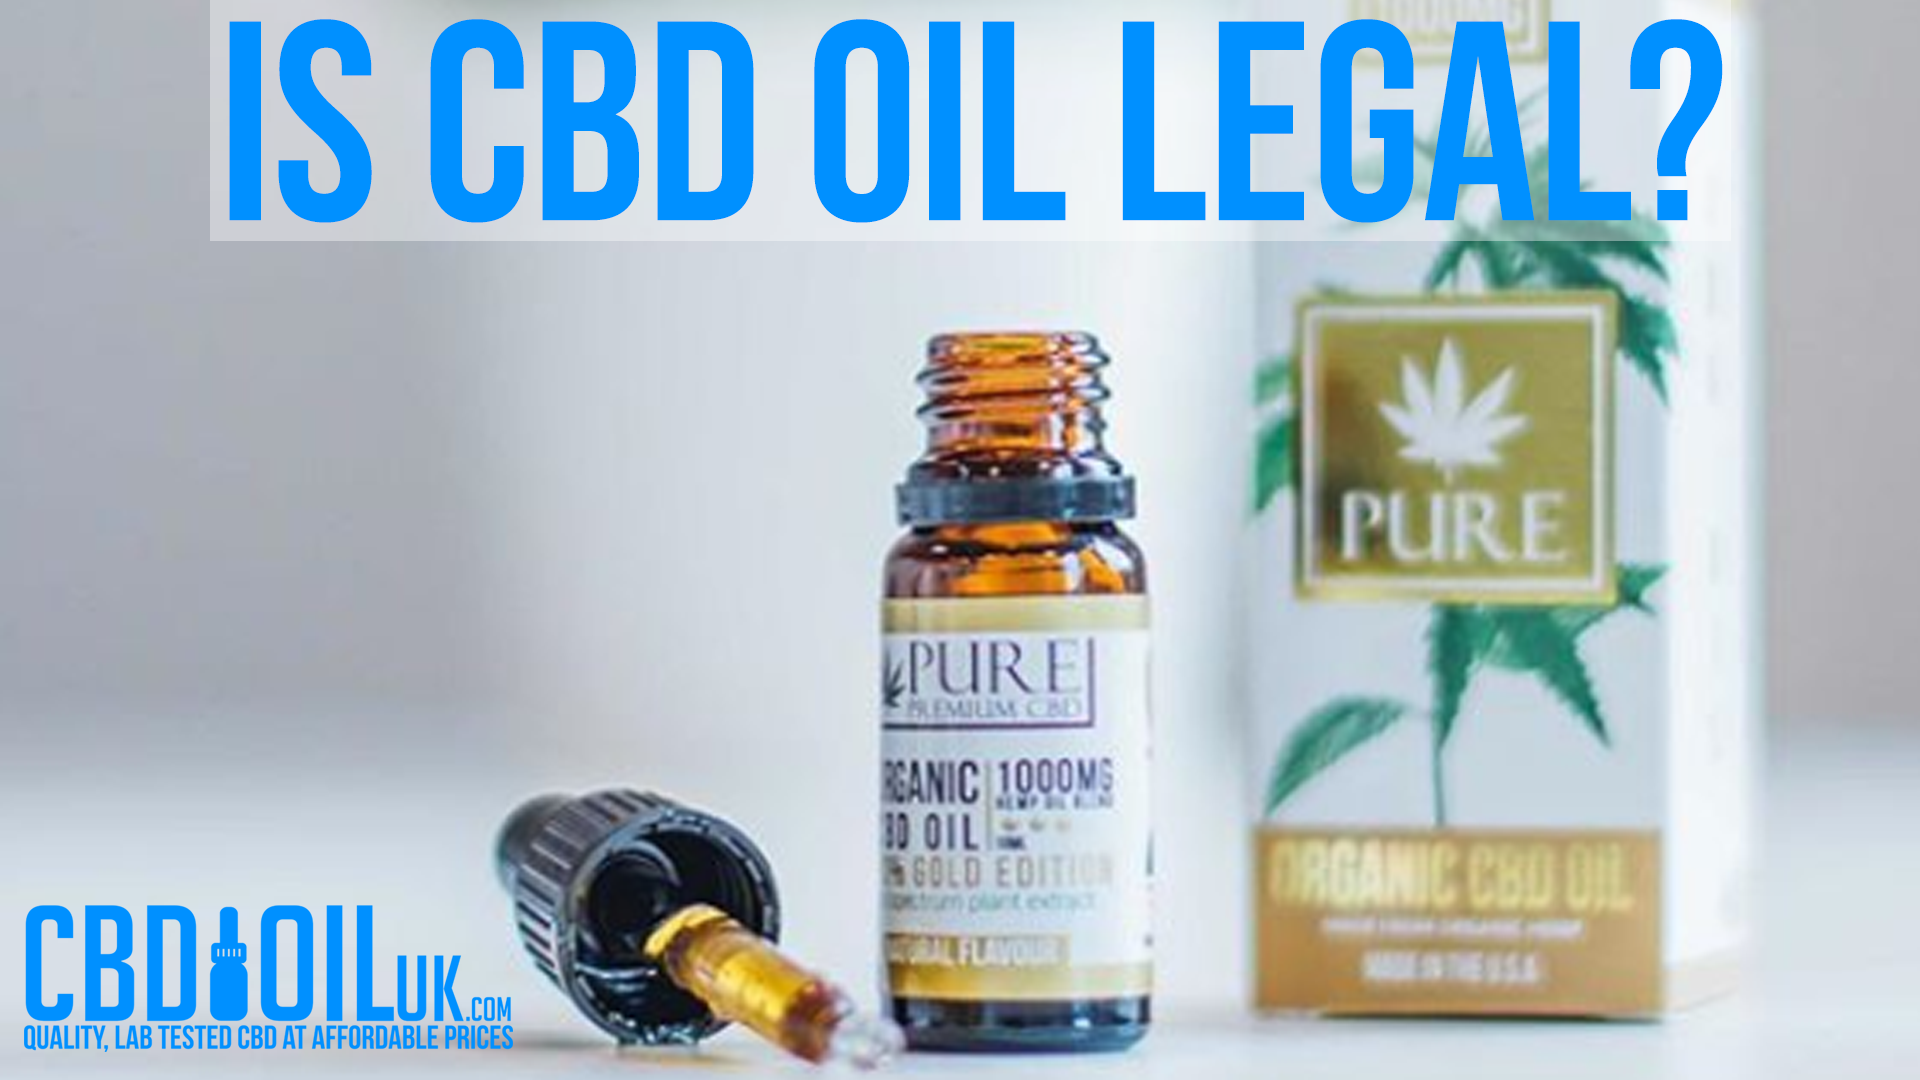 IS CBD OIL LEGAL IN THE UK?